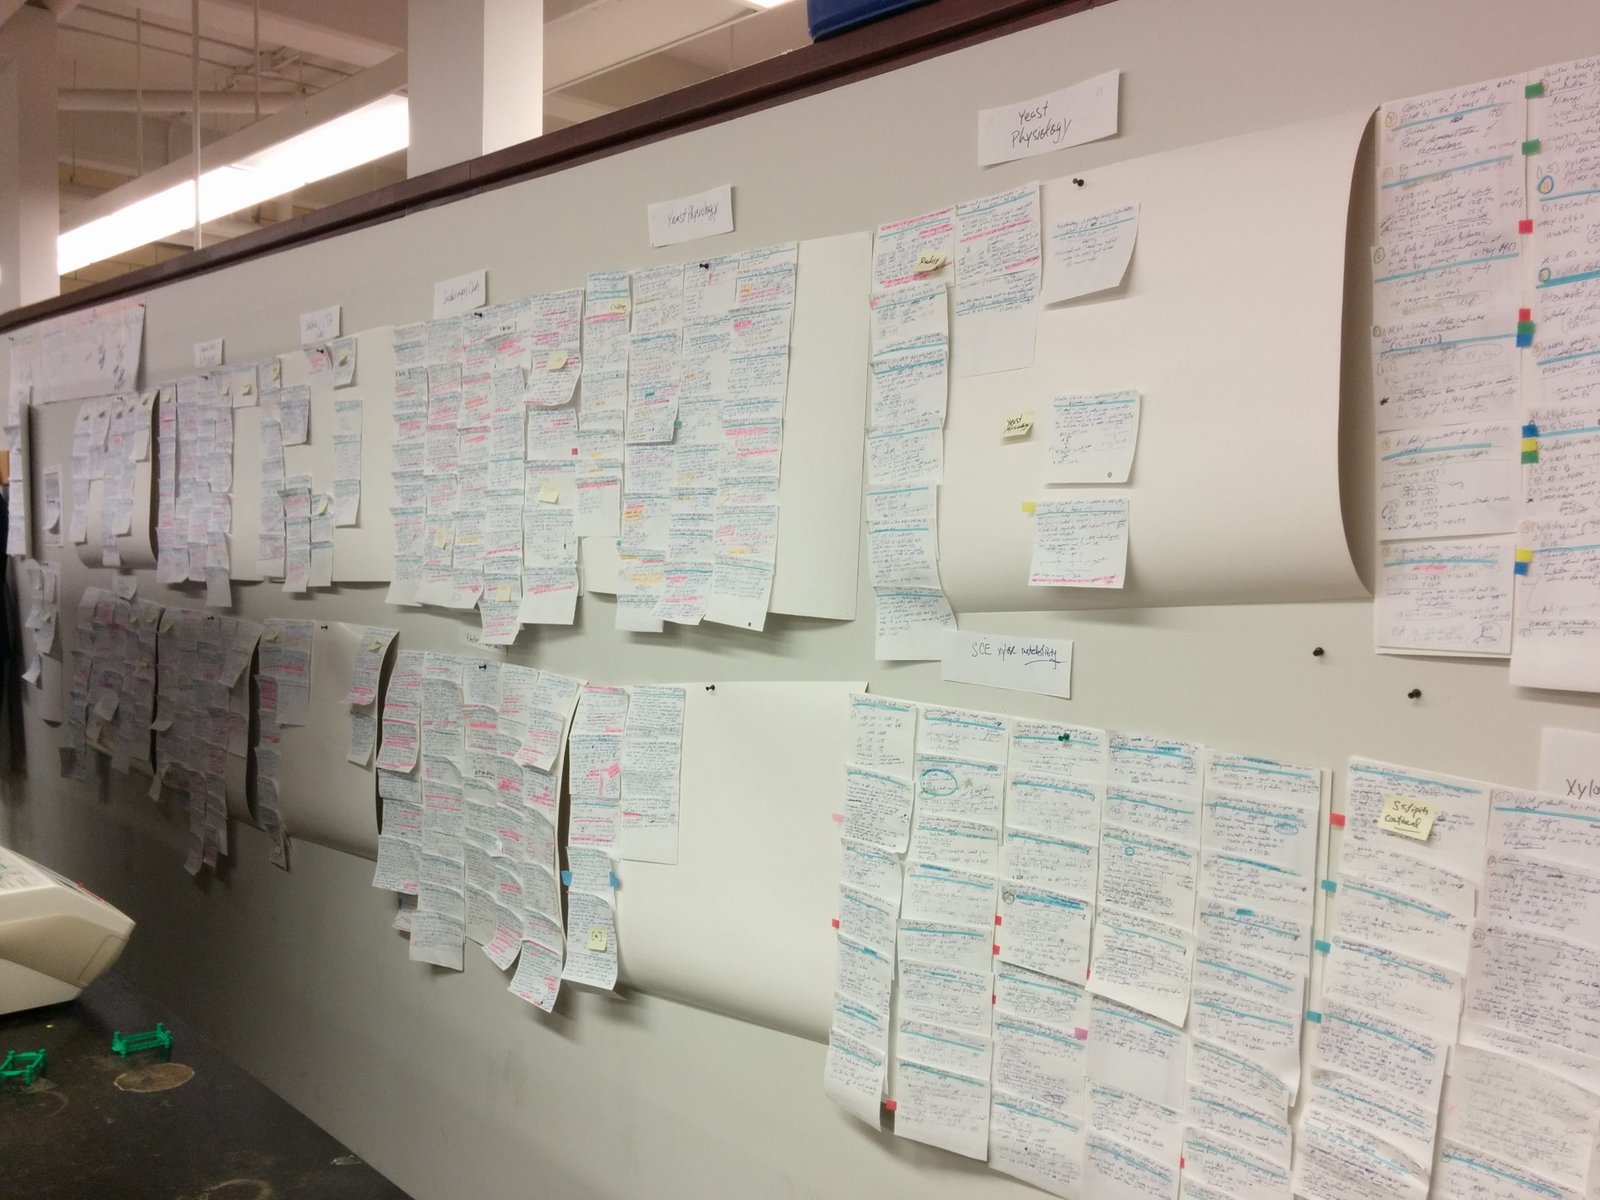 Summaries of journal articled pinned to a wall.